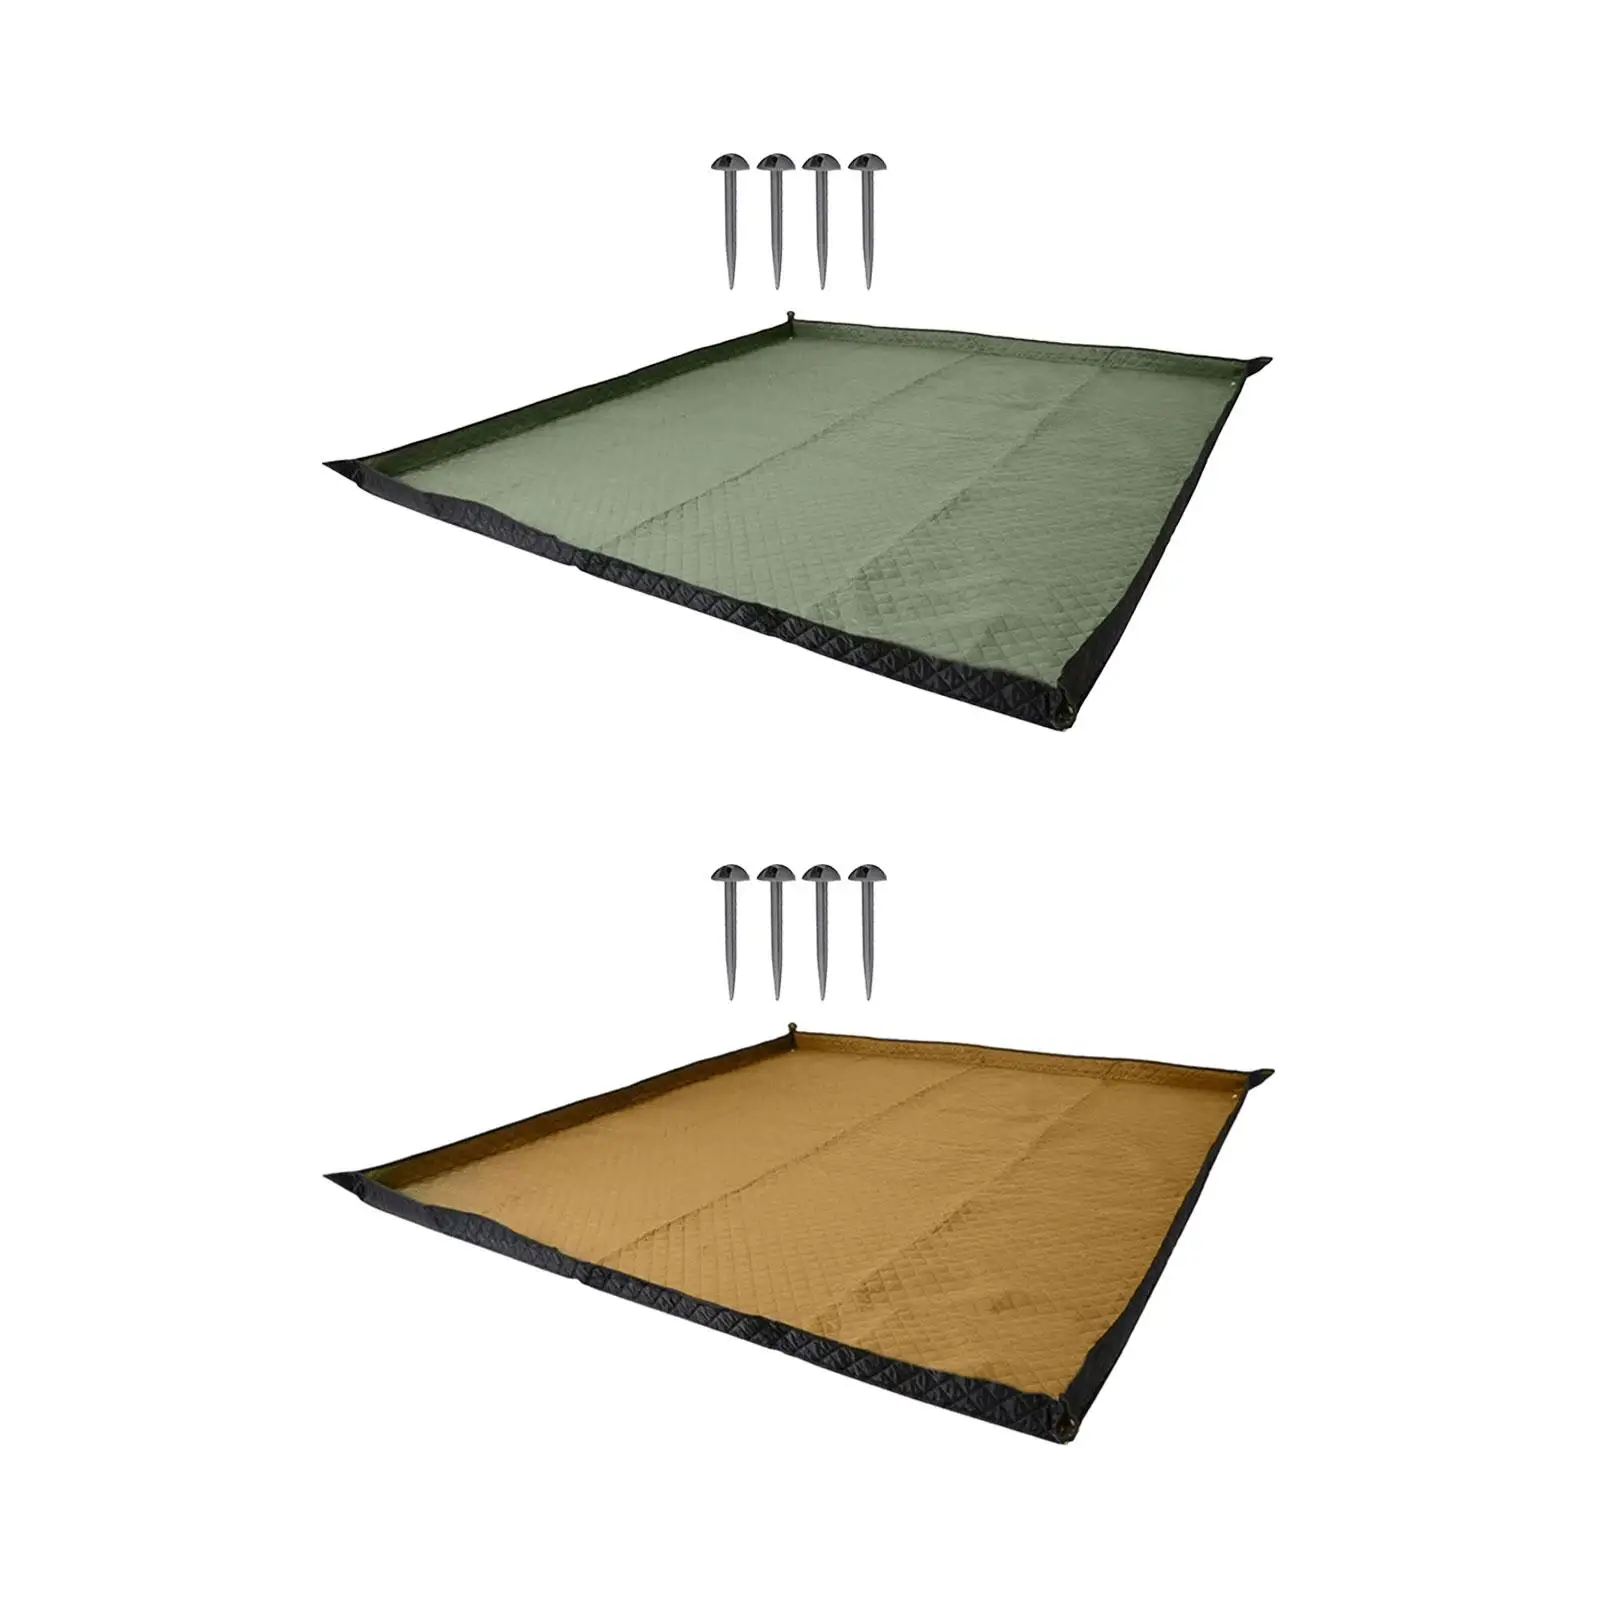 Tent Pad Sleeping Pad Foldable Moistureproof Wear Resistant Rug Camping Blanket Picnic Blanket for Camping Hiking Backpacking